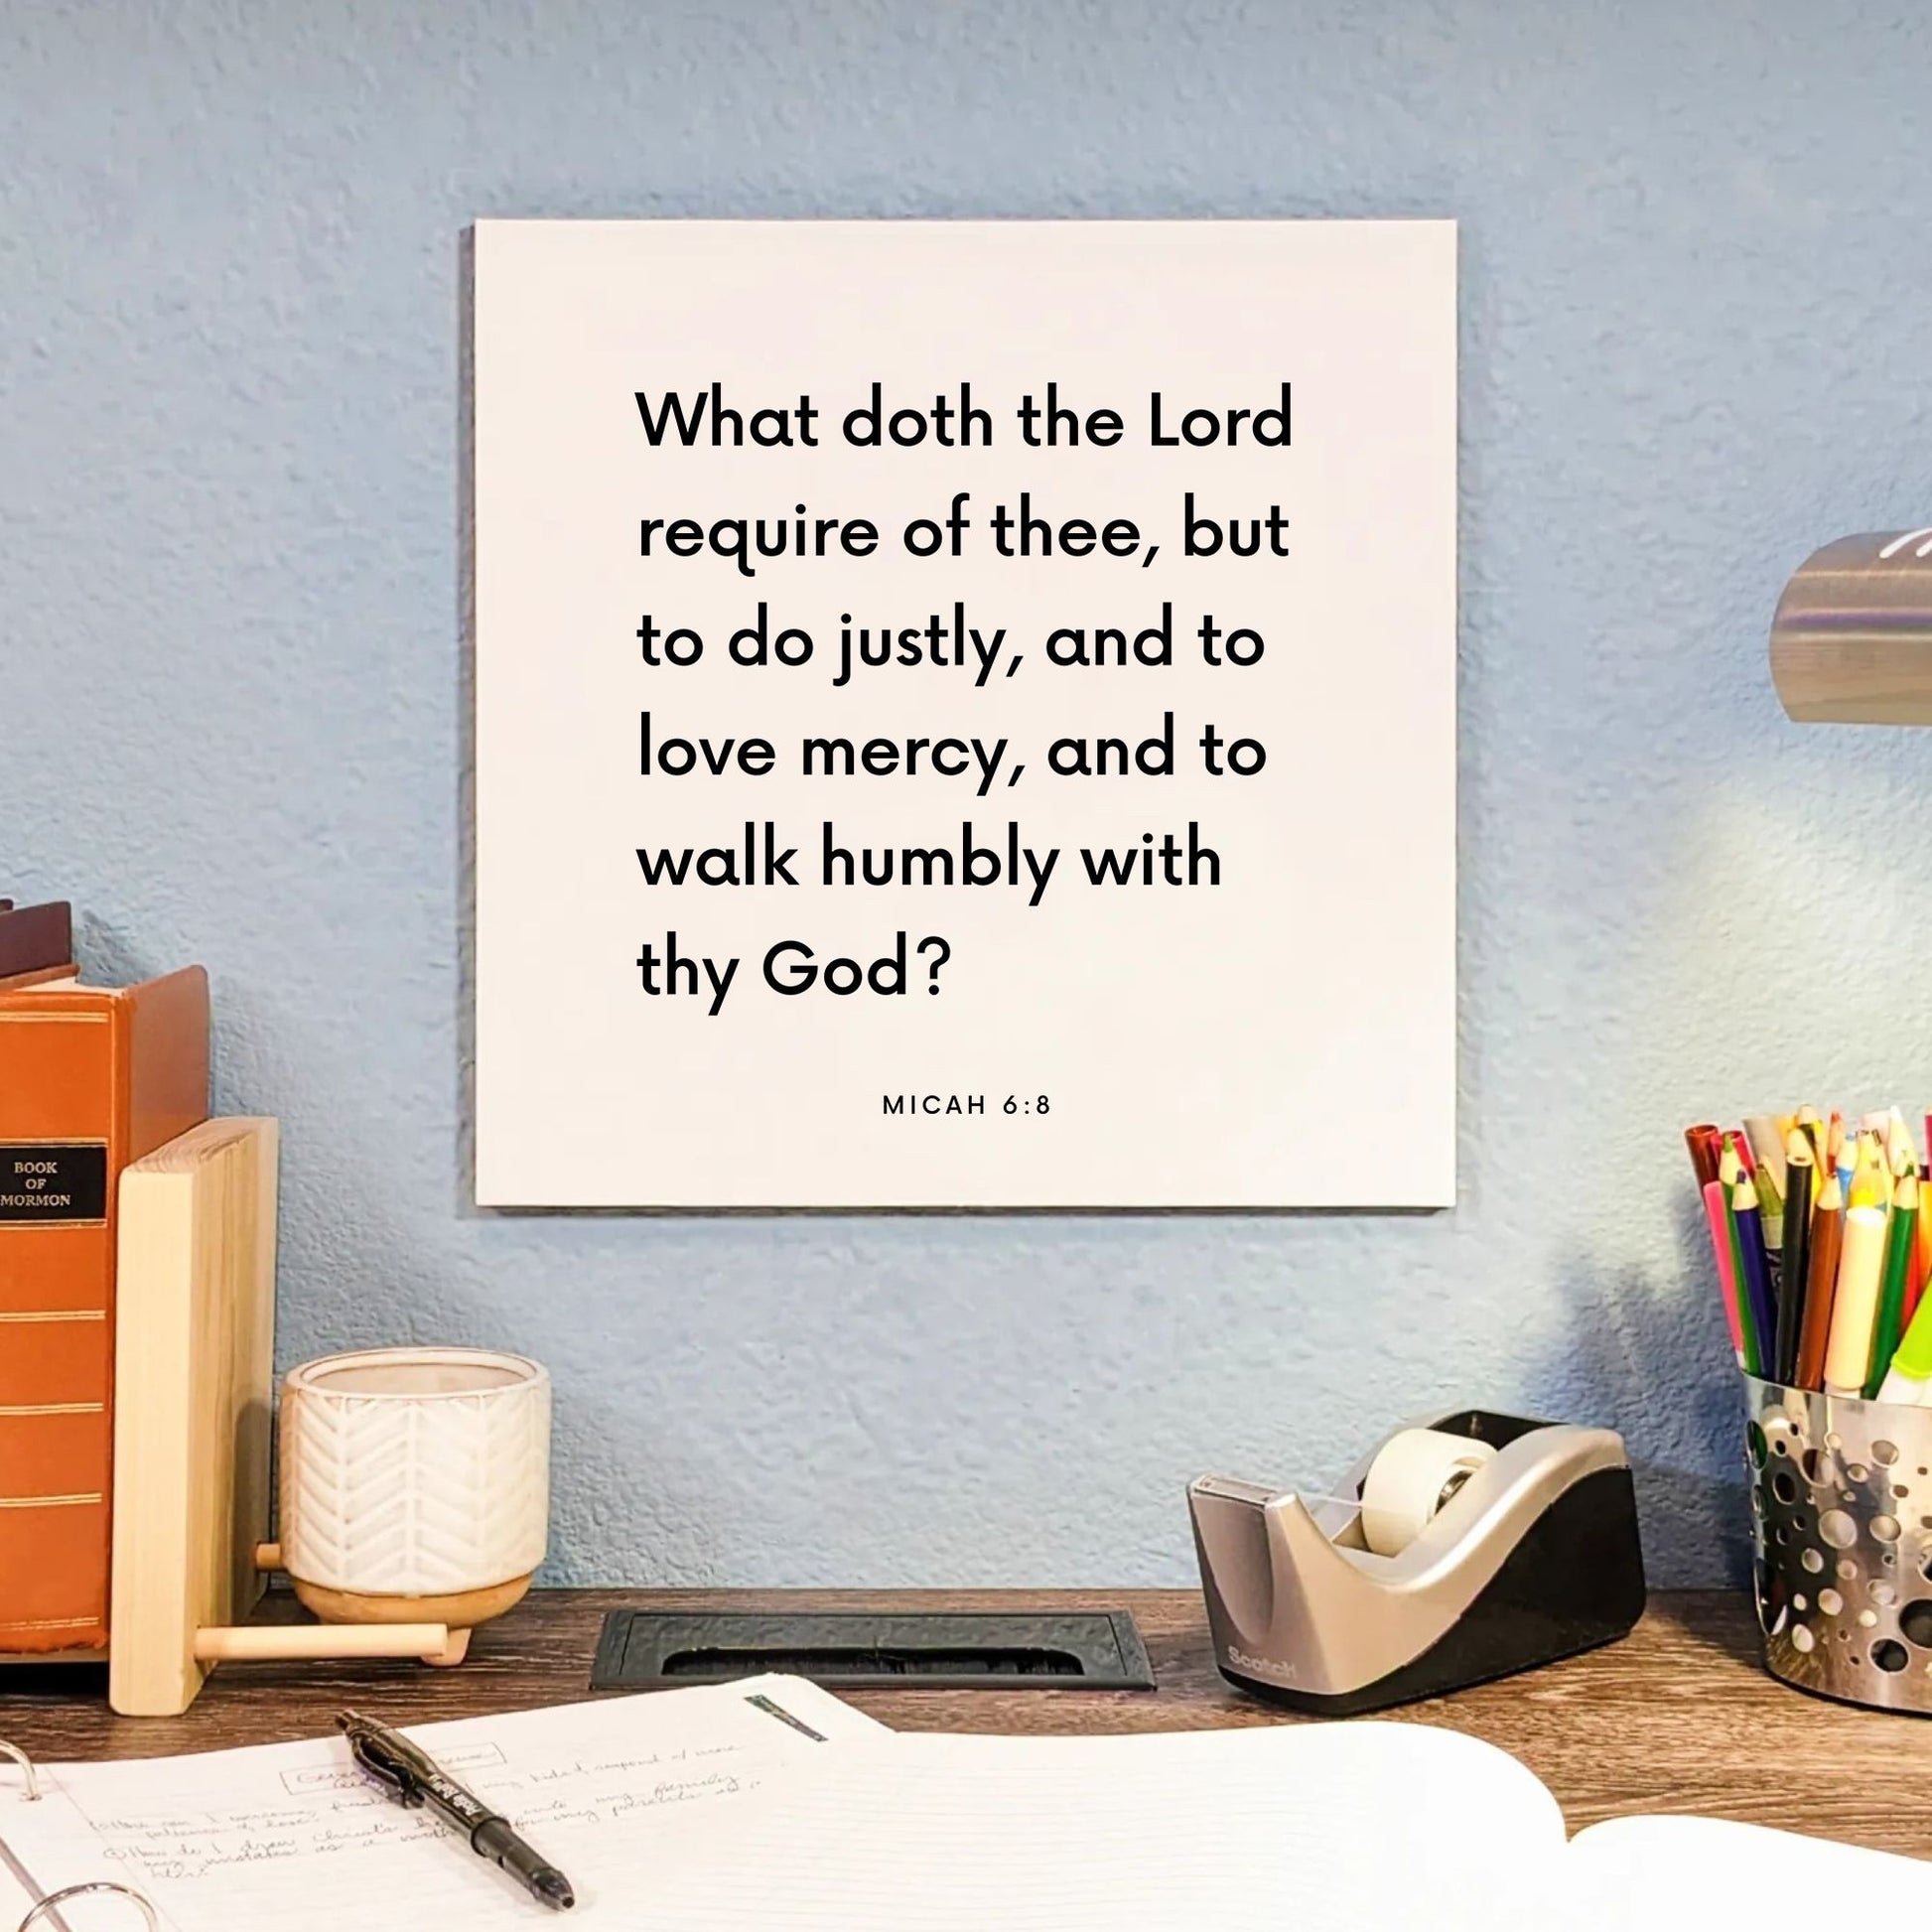 Desk mouting of the scripture tile for Micah 6:8 - "What doth the Lord require of thee?"